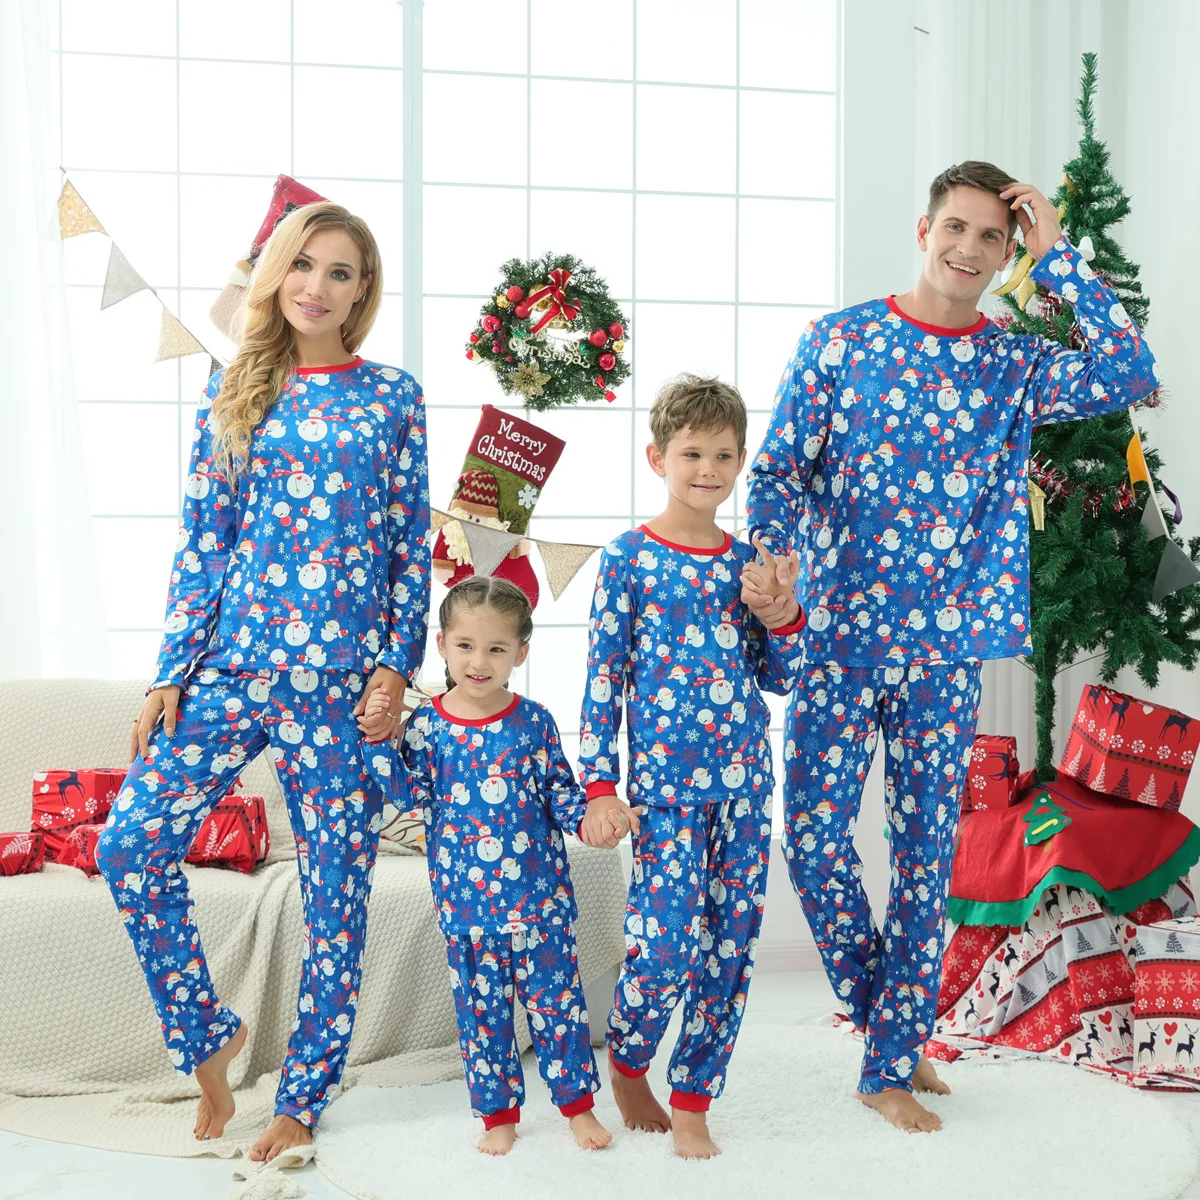 

parent-child pajamas Christmas loungewear long-sleeved snowflake Christmas female adult kids toddler pajamas in stock, Picture shows